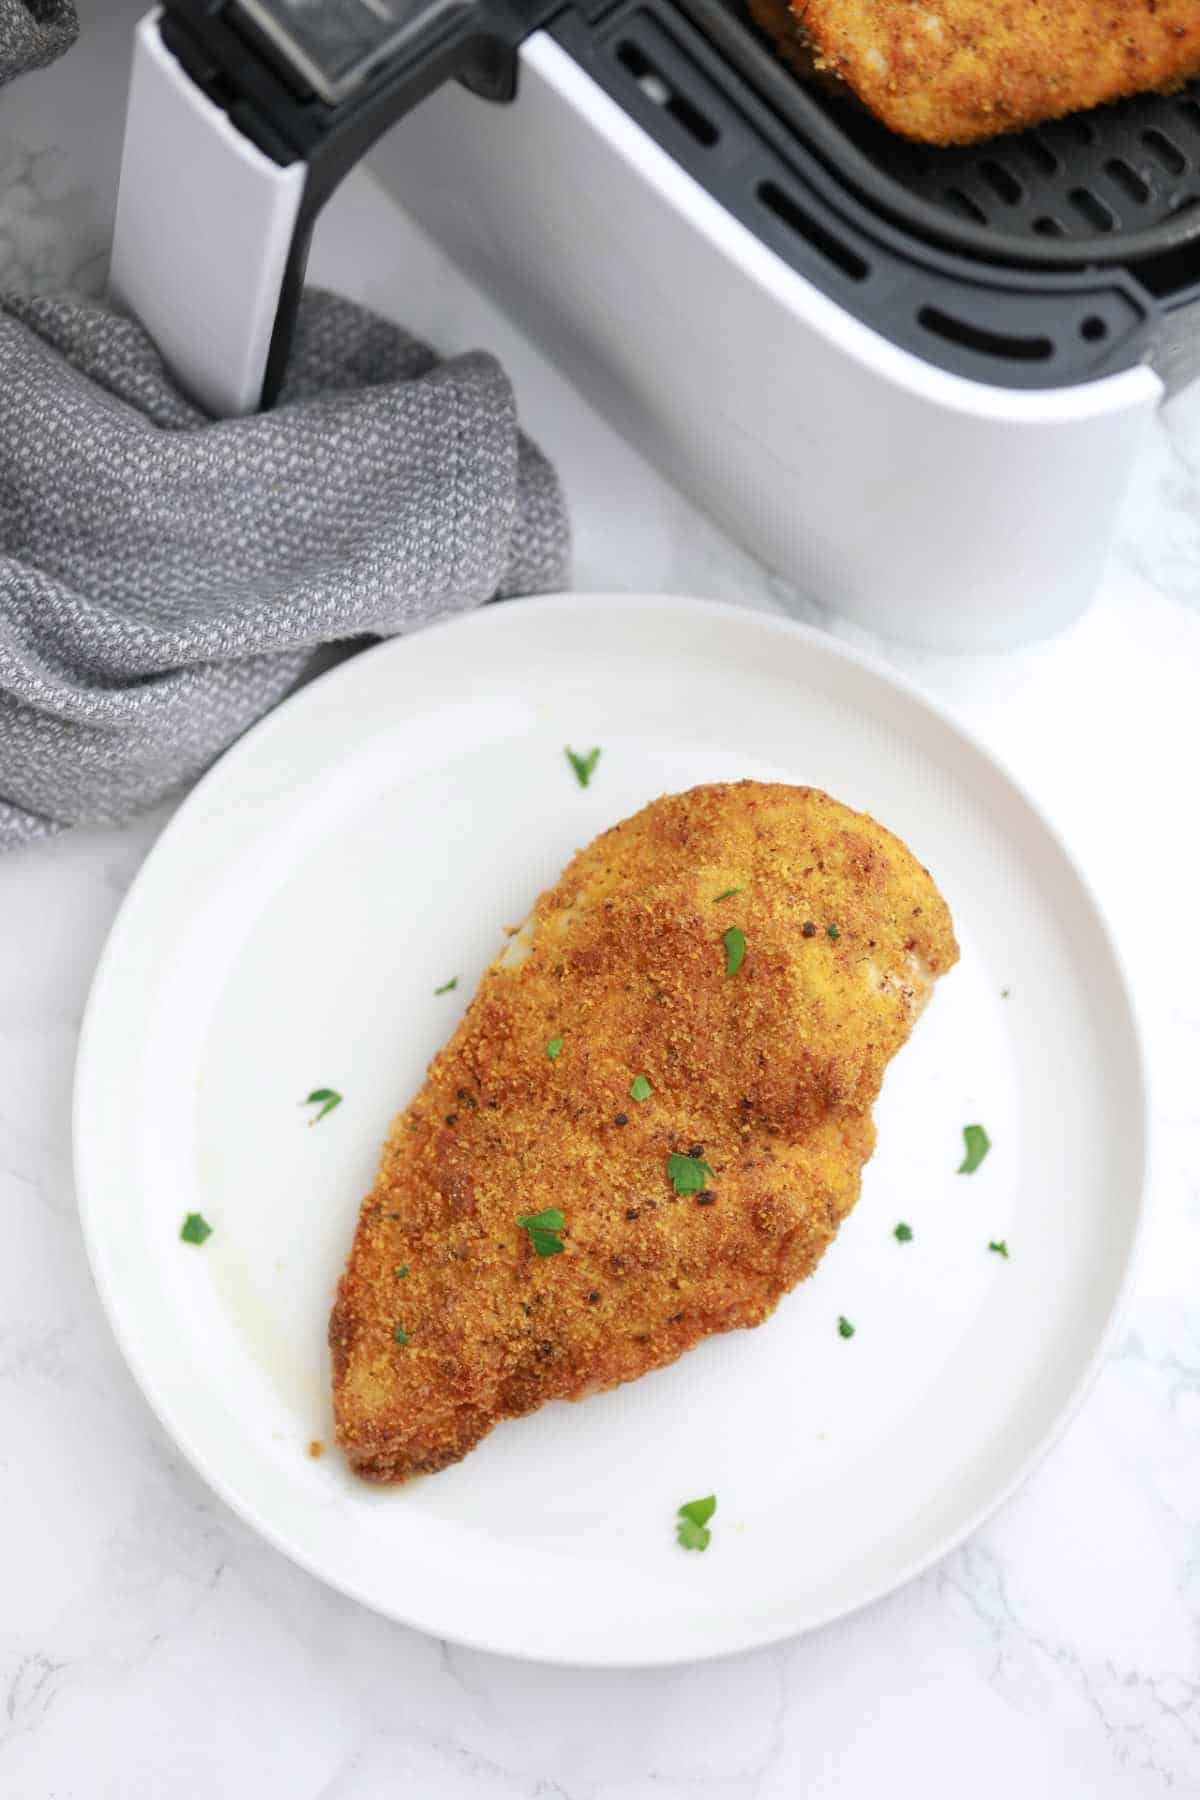 Breaded chicken breast in air fryer and on a white plate.